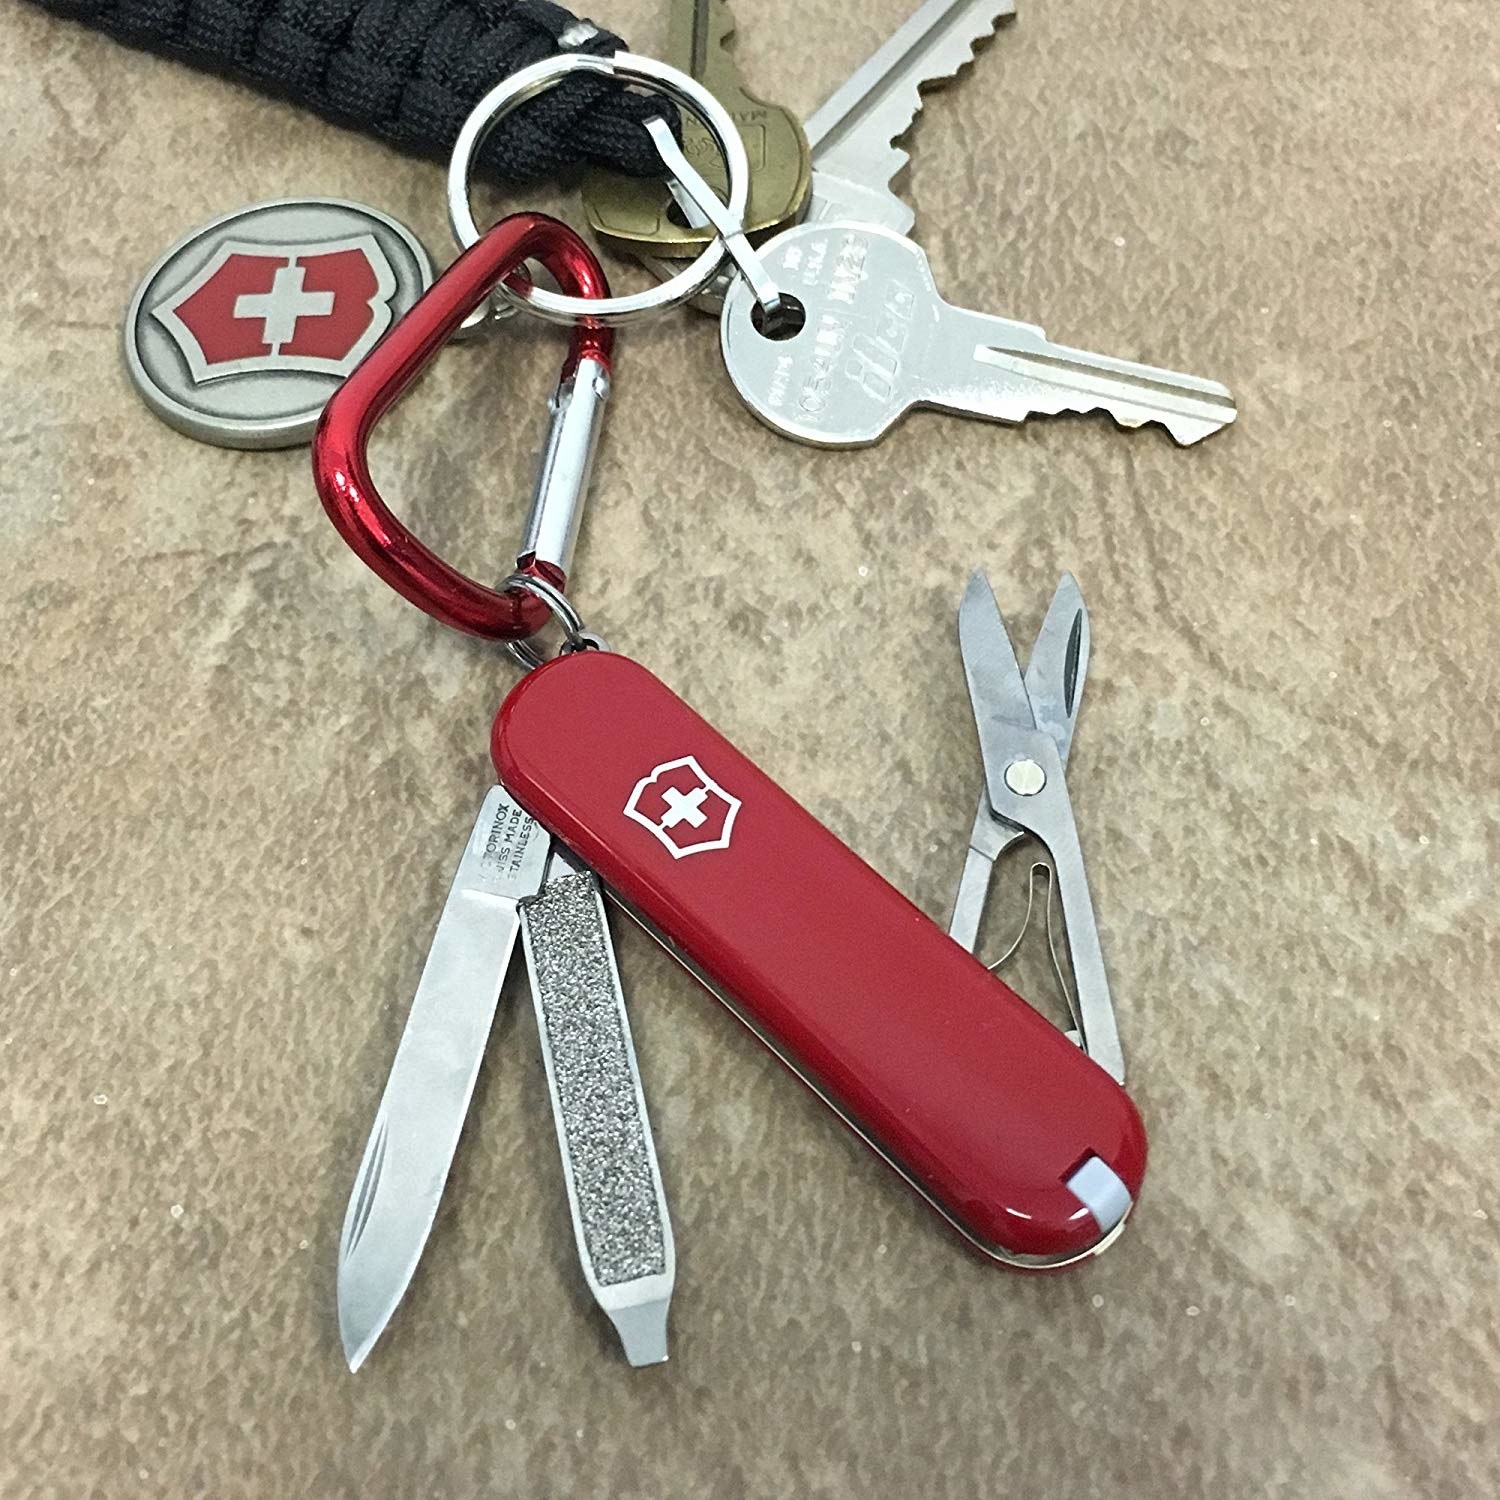 The Swiss Army Knife in Red on a key chain with the small scissors, nail file, and knife coming out of it